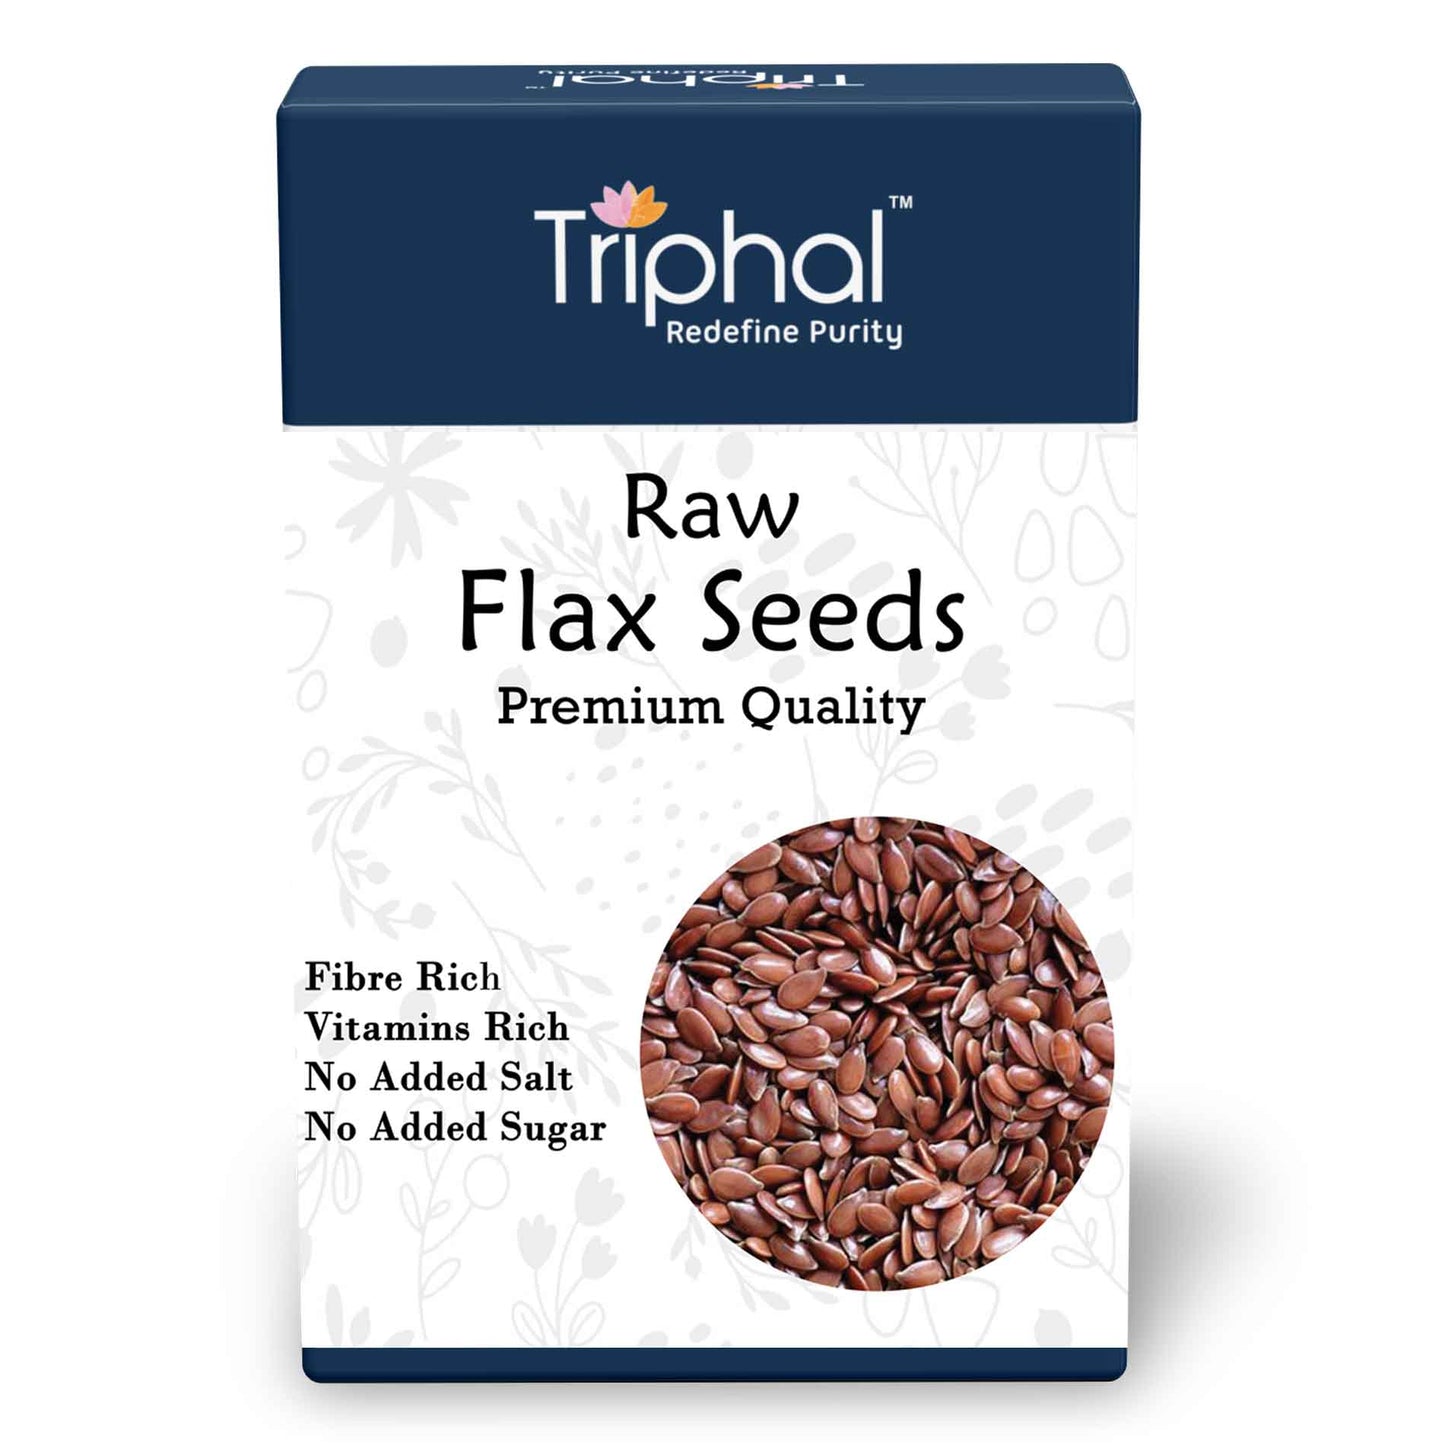 Organic raw flax seeds by Triphal, packed with fiber, omega-3 fatty acids, and antioxidants